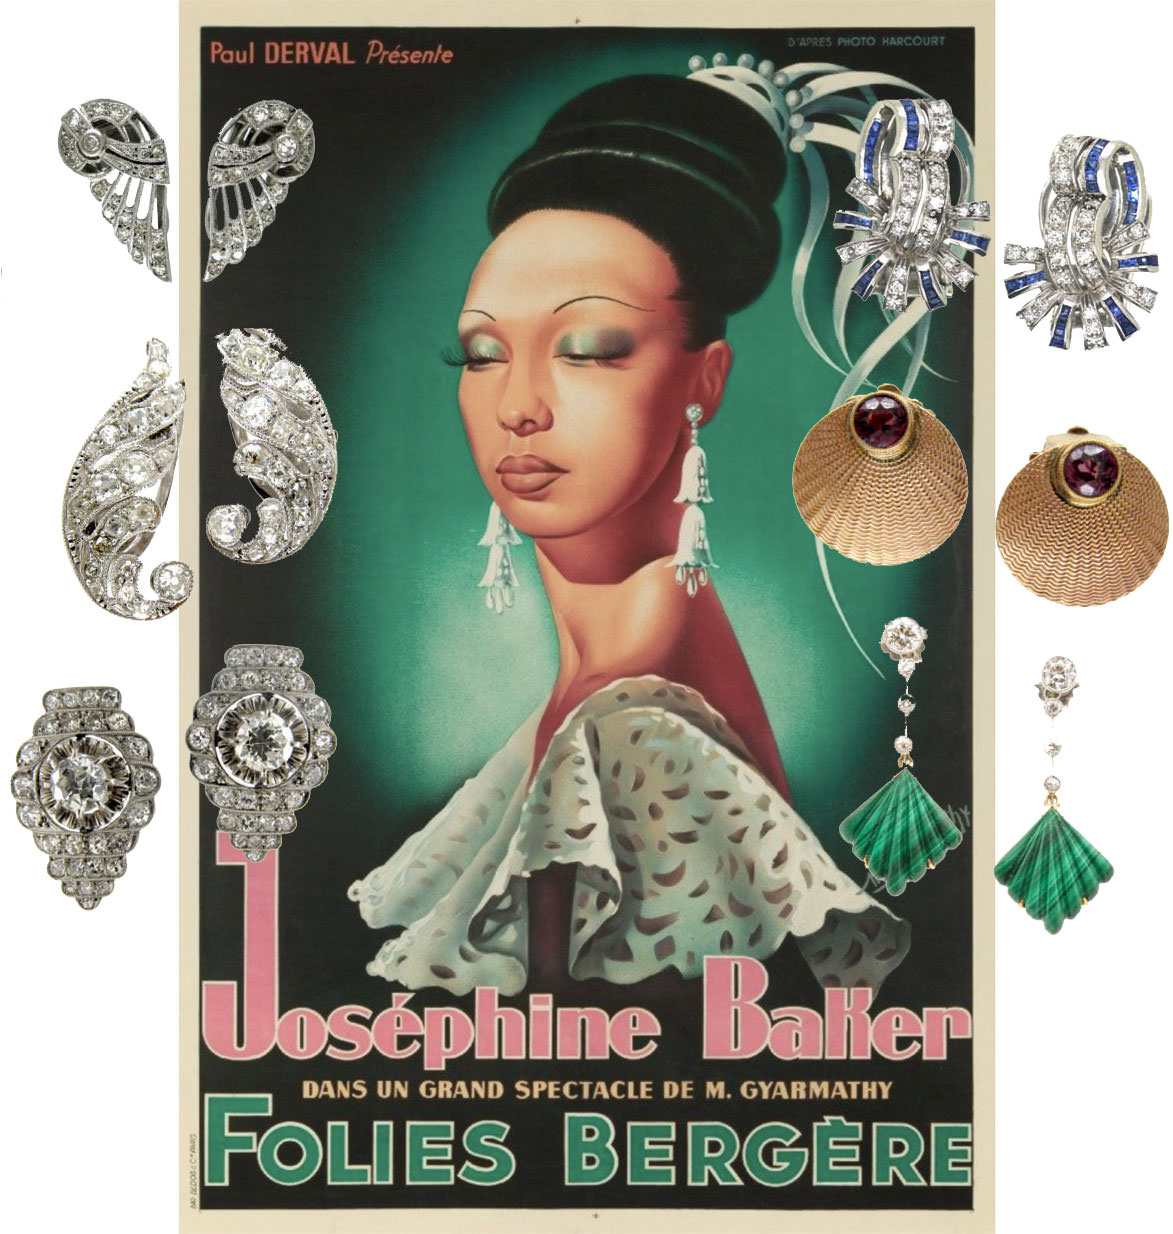 Promotional poster for Josephine Baker at the Folies Bergère